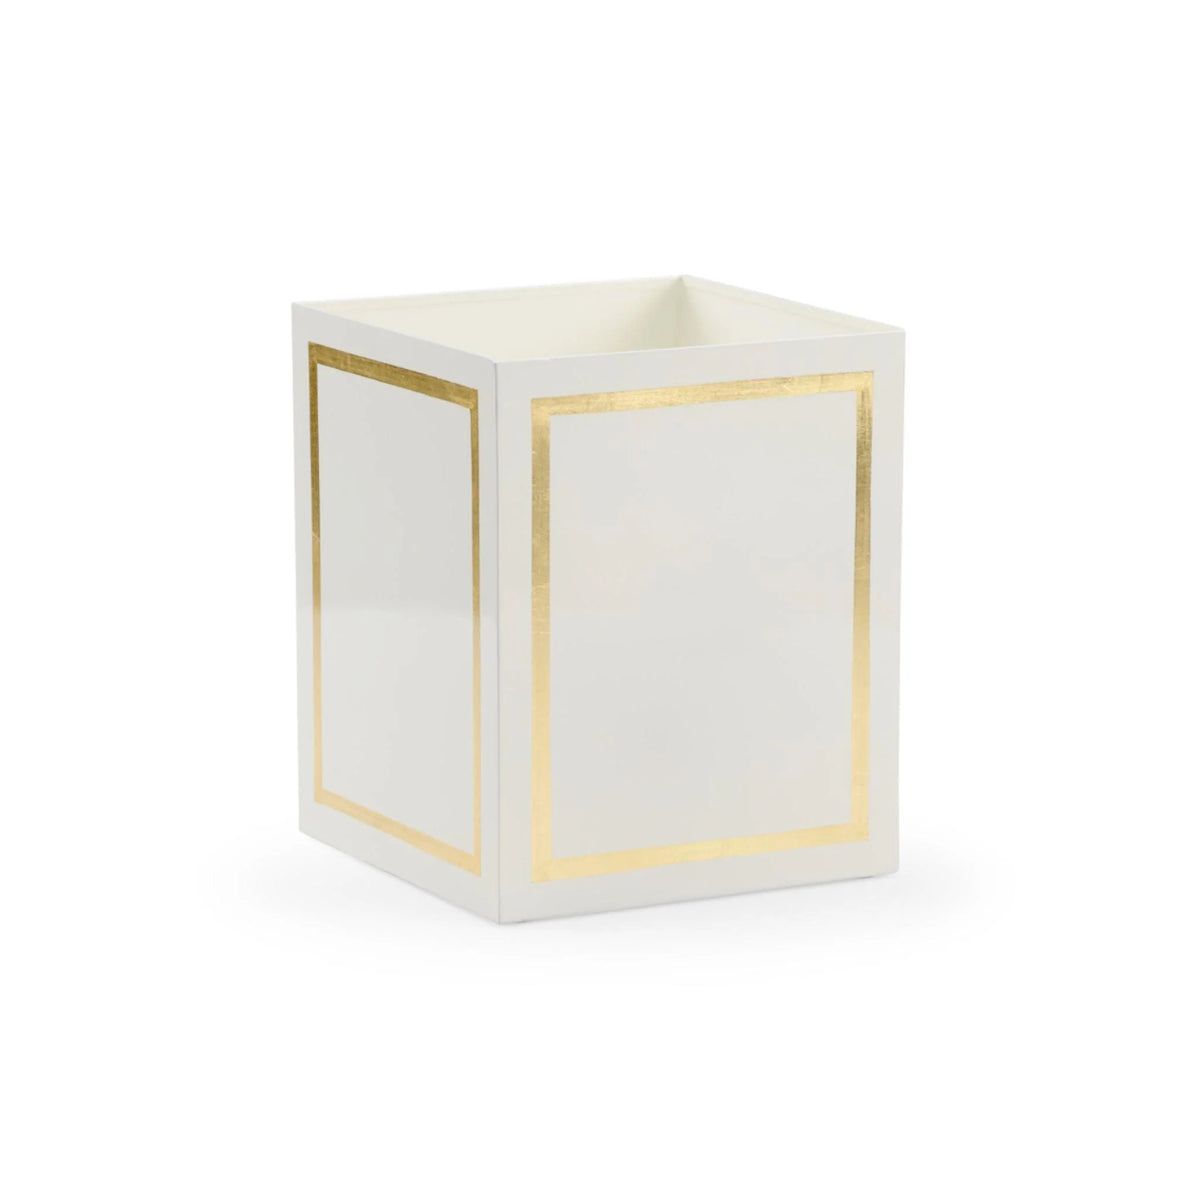 Cream Metal Wastebasket with Metallic Gold Trim | The Well Appointed House, LLC